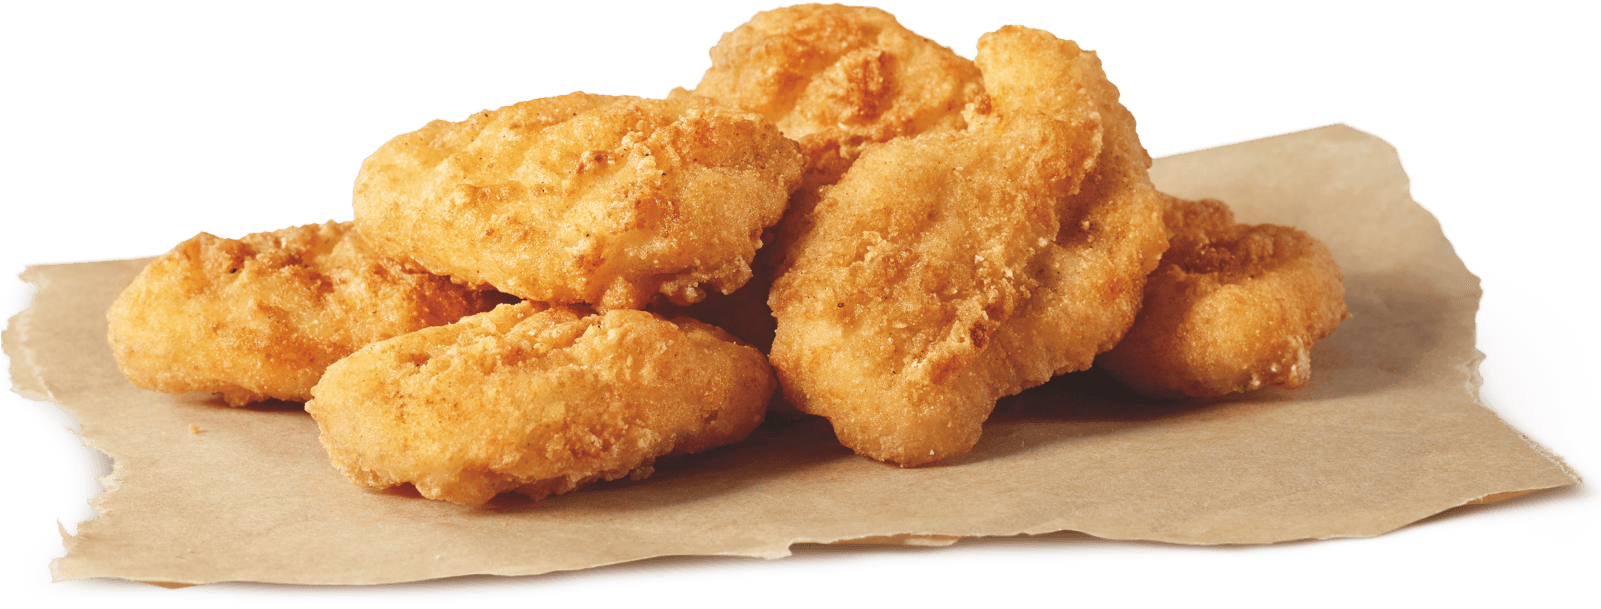 Fried Chicken Nuggets Transparent Image